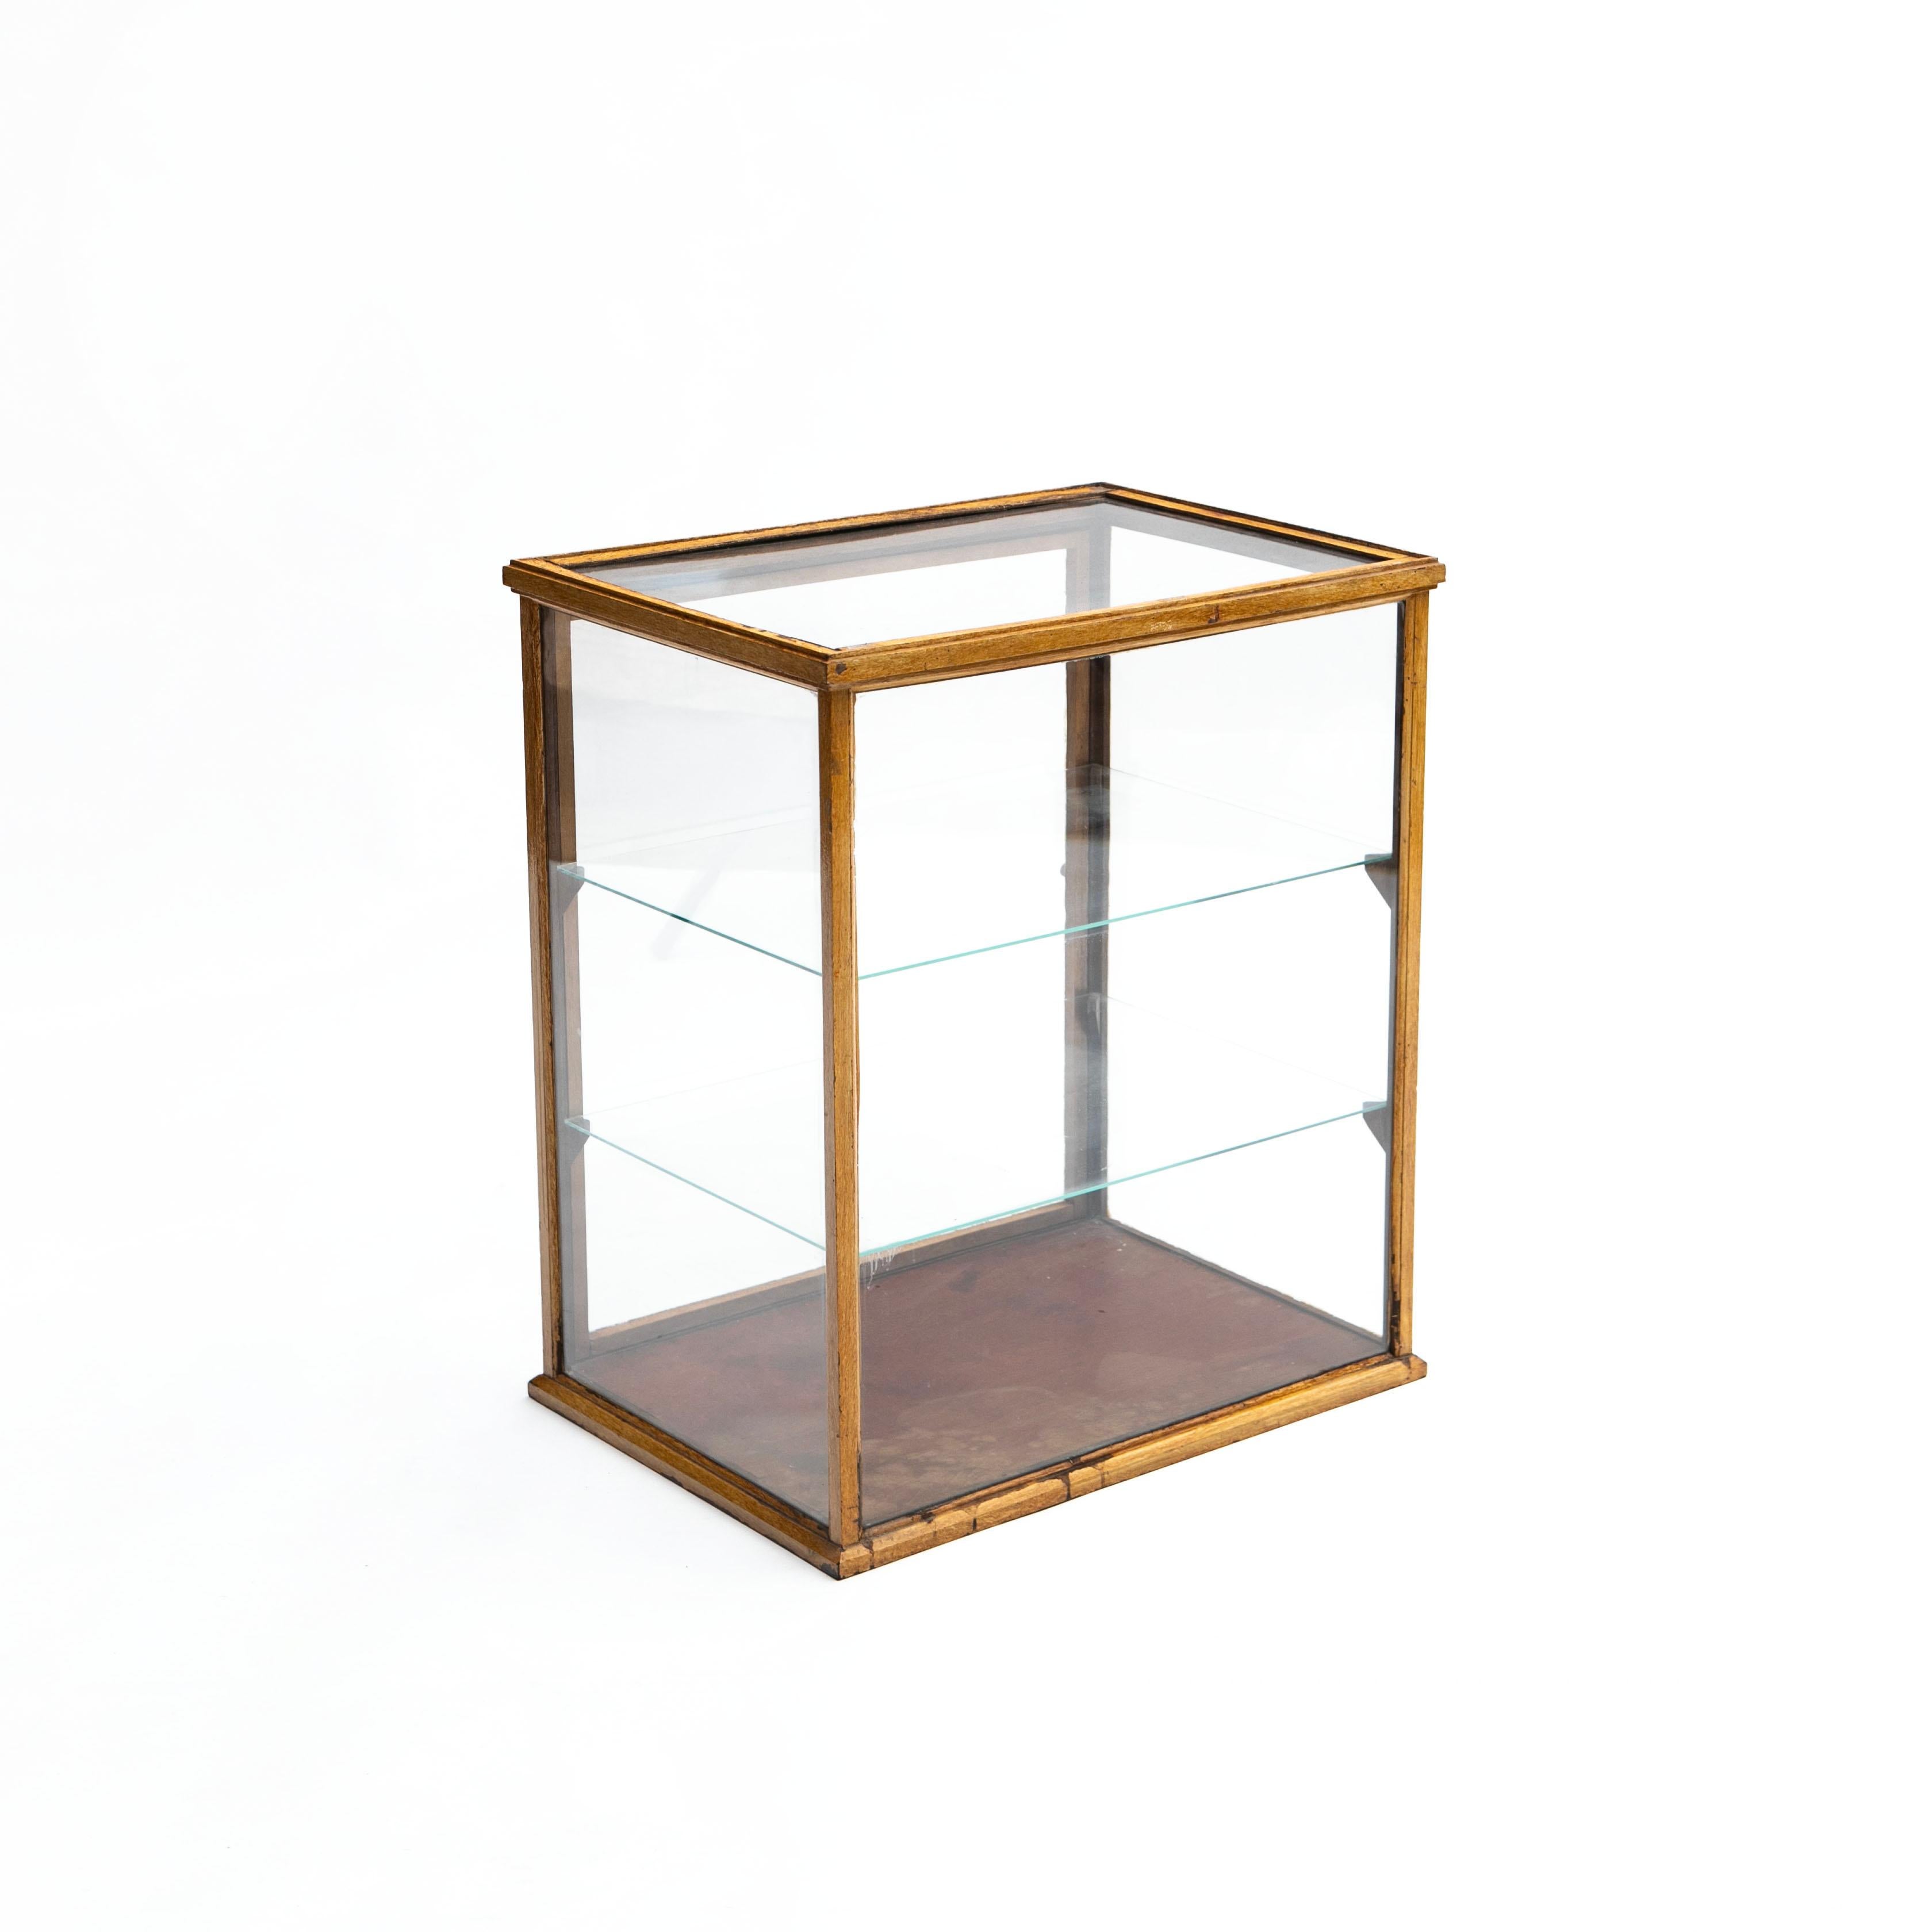 Explore timeless elegance with our exquisite Table Showcase / Display Cabinet, a captivating piece from Denmark dating back to 1880-1900. 
Meticulously crafted in pine, the original yellow color and beautiful natural patina make it a unique addition